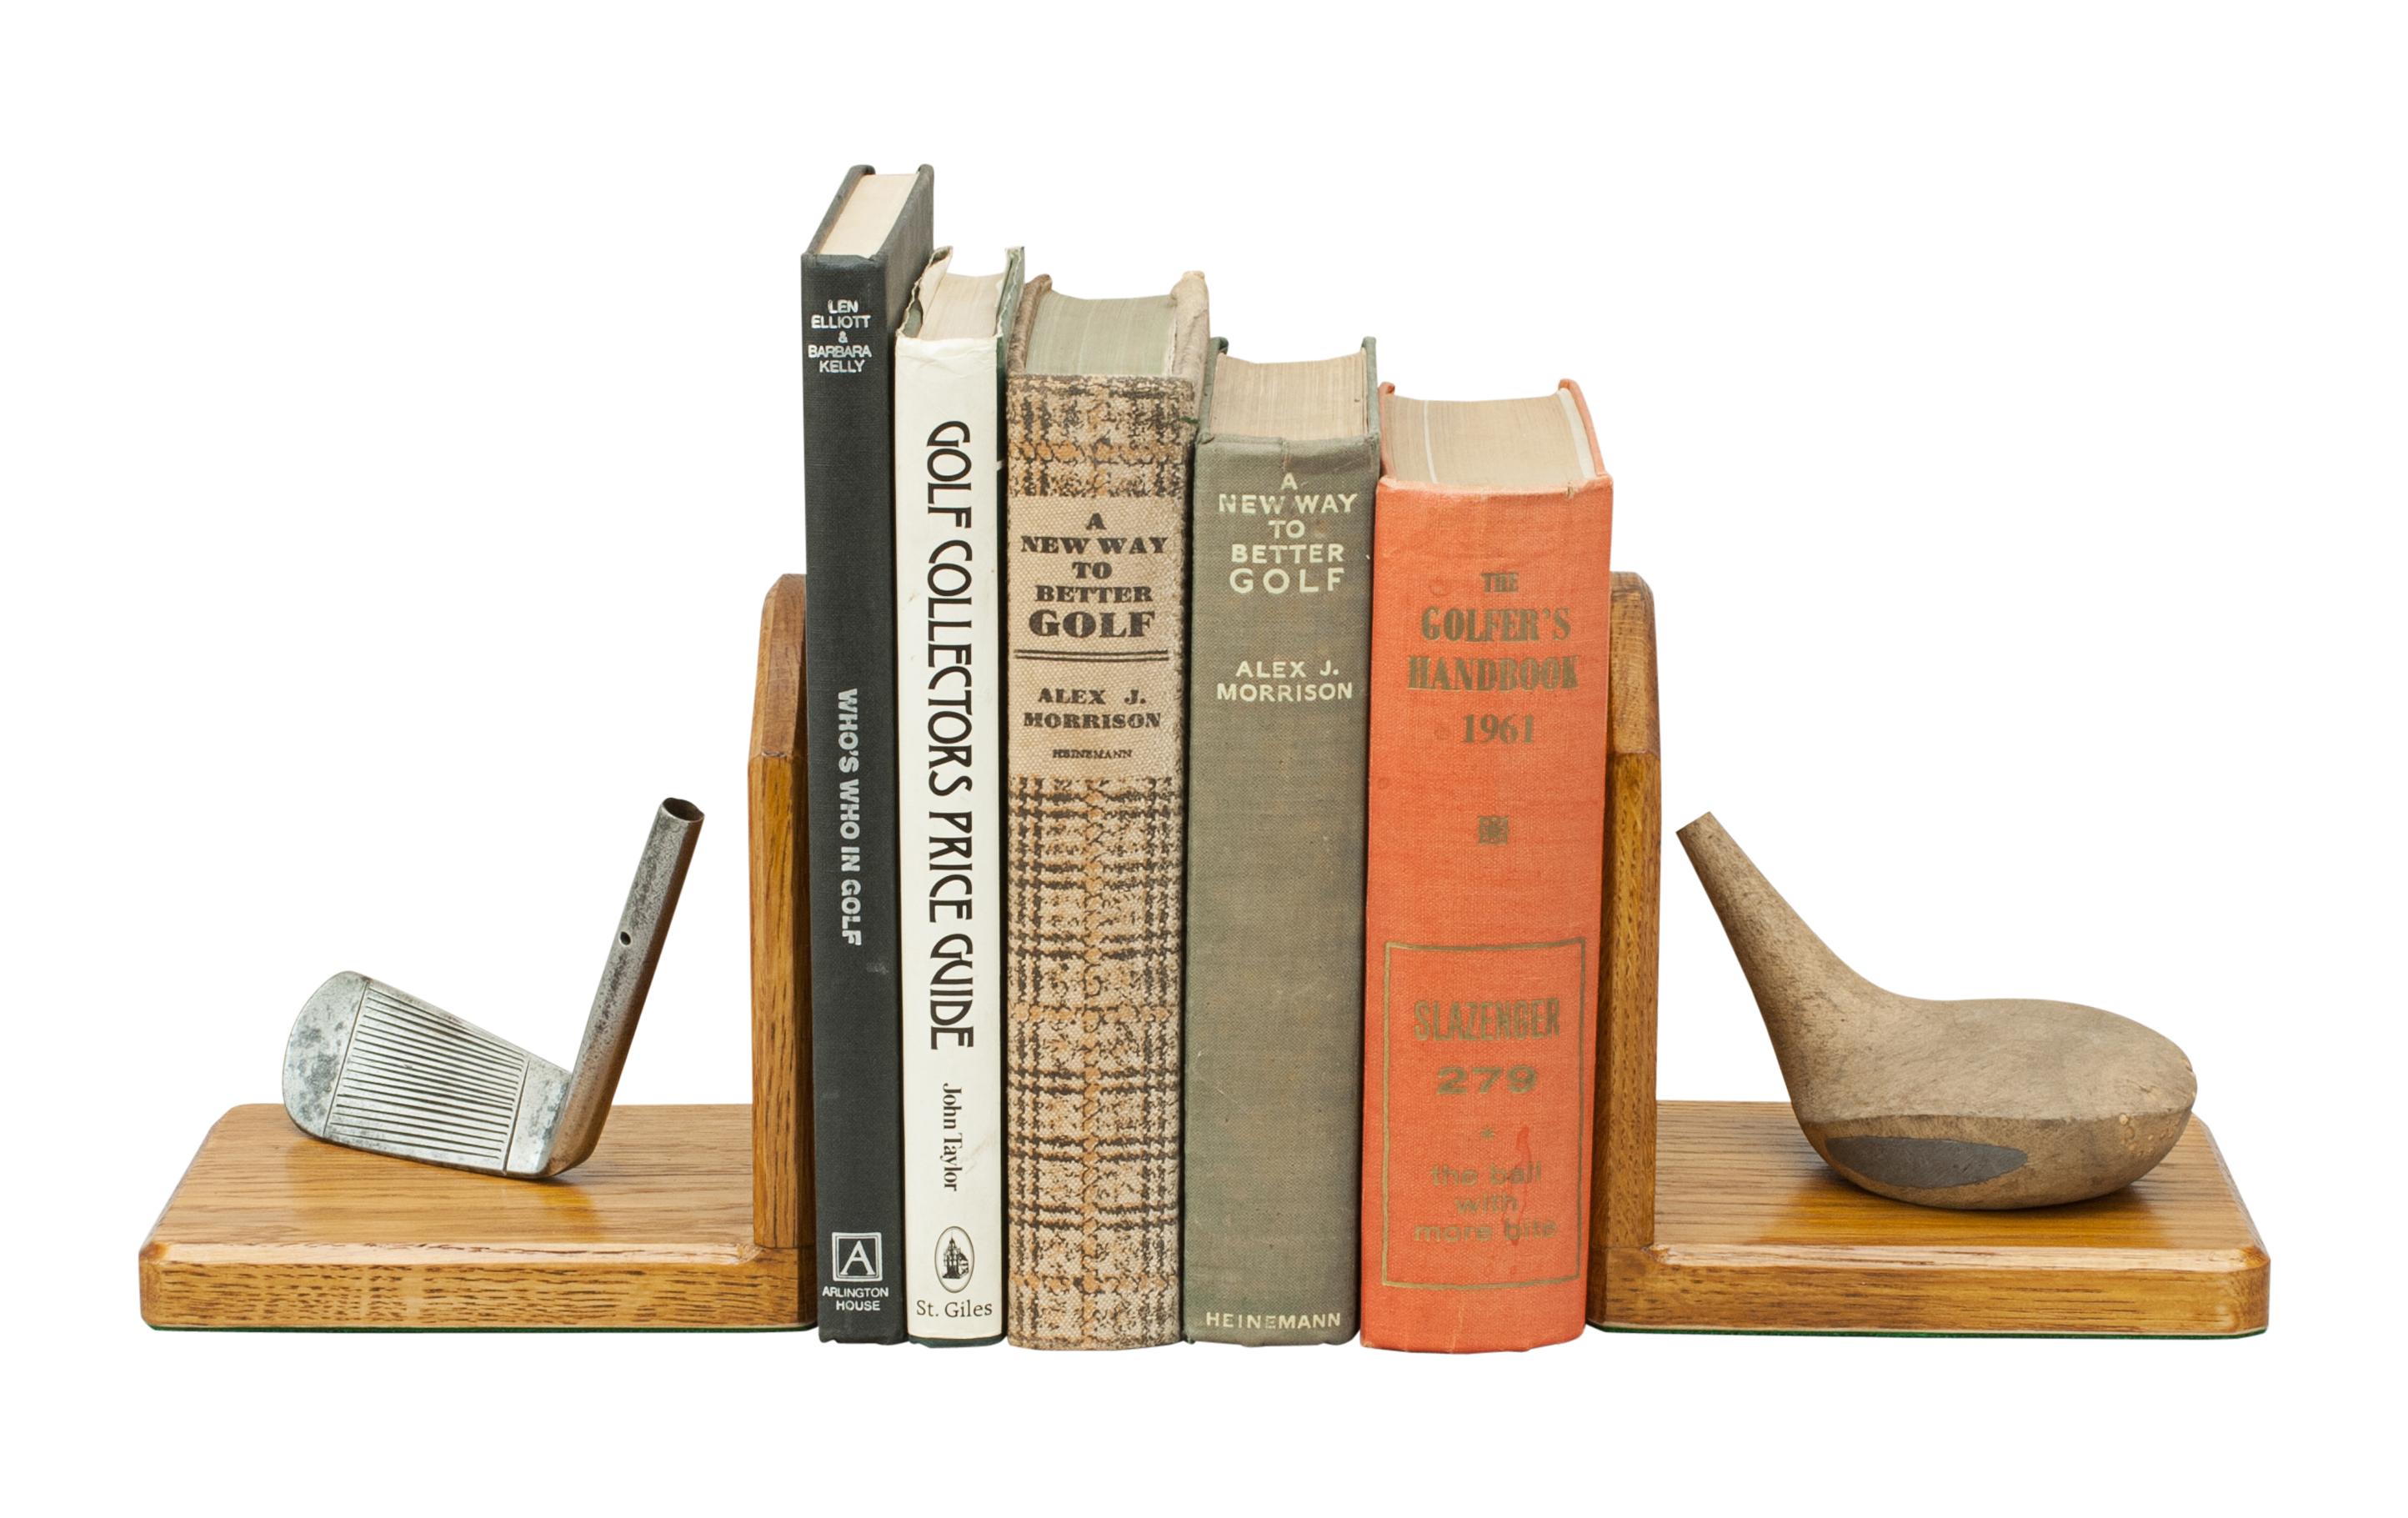 Robert Simpson Bookends, Jigger & Wood.
A pair of bookends hand crafted from high quality traditional materials with original 1940's club heads. The heads came from the Carnoustie workshop of Robert Simpson when it closed down and have been mounted